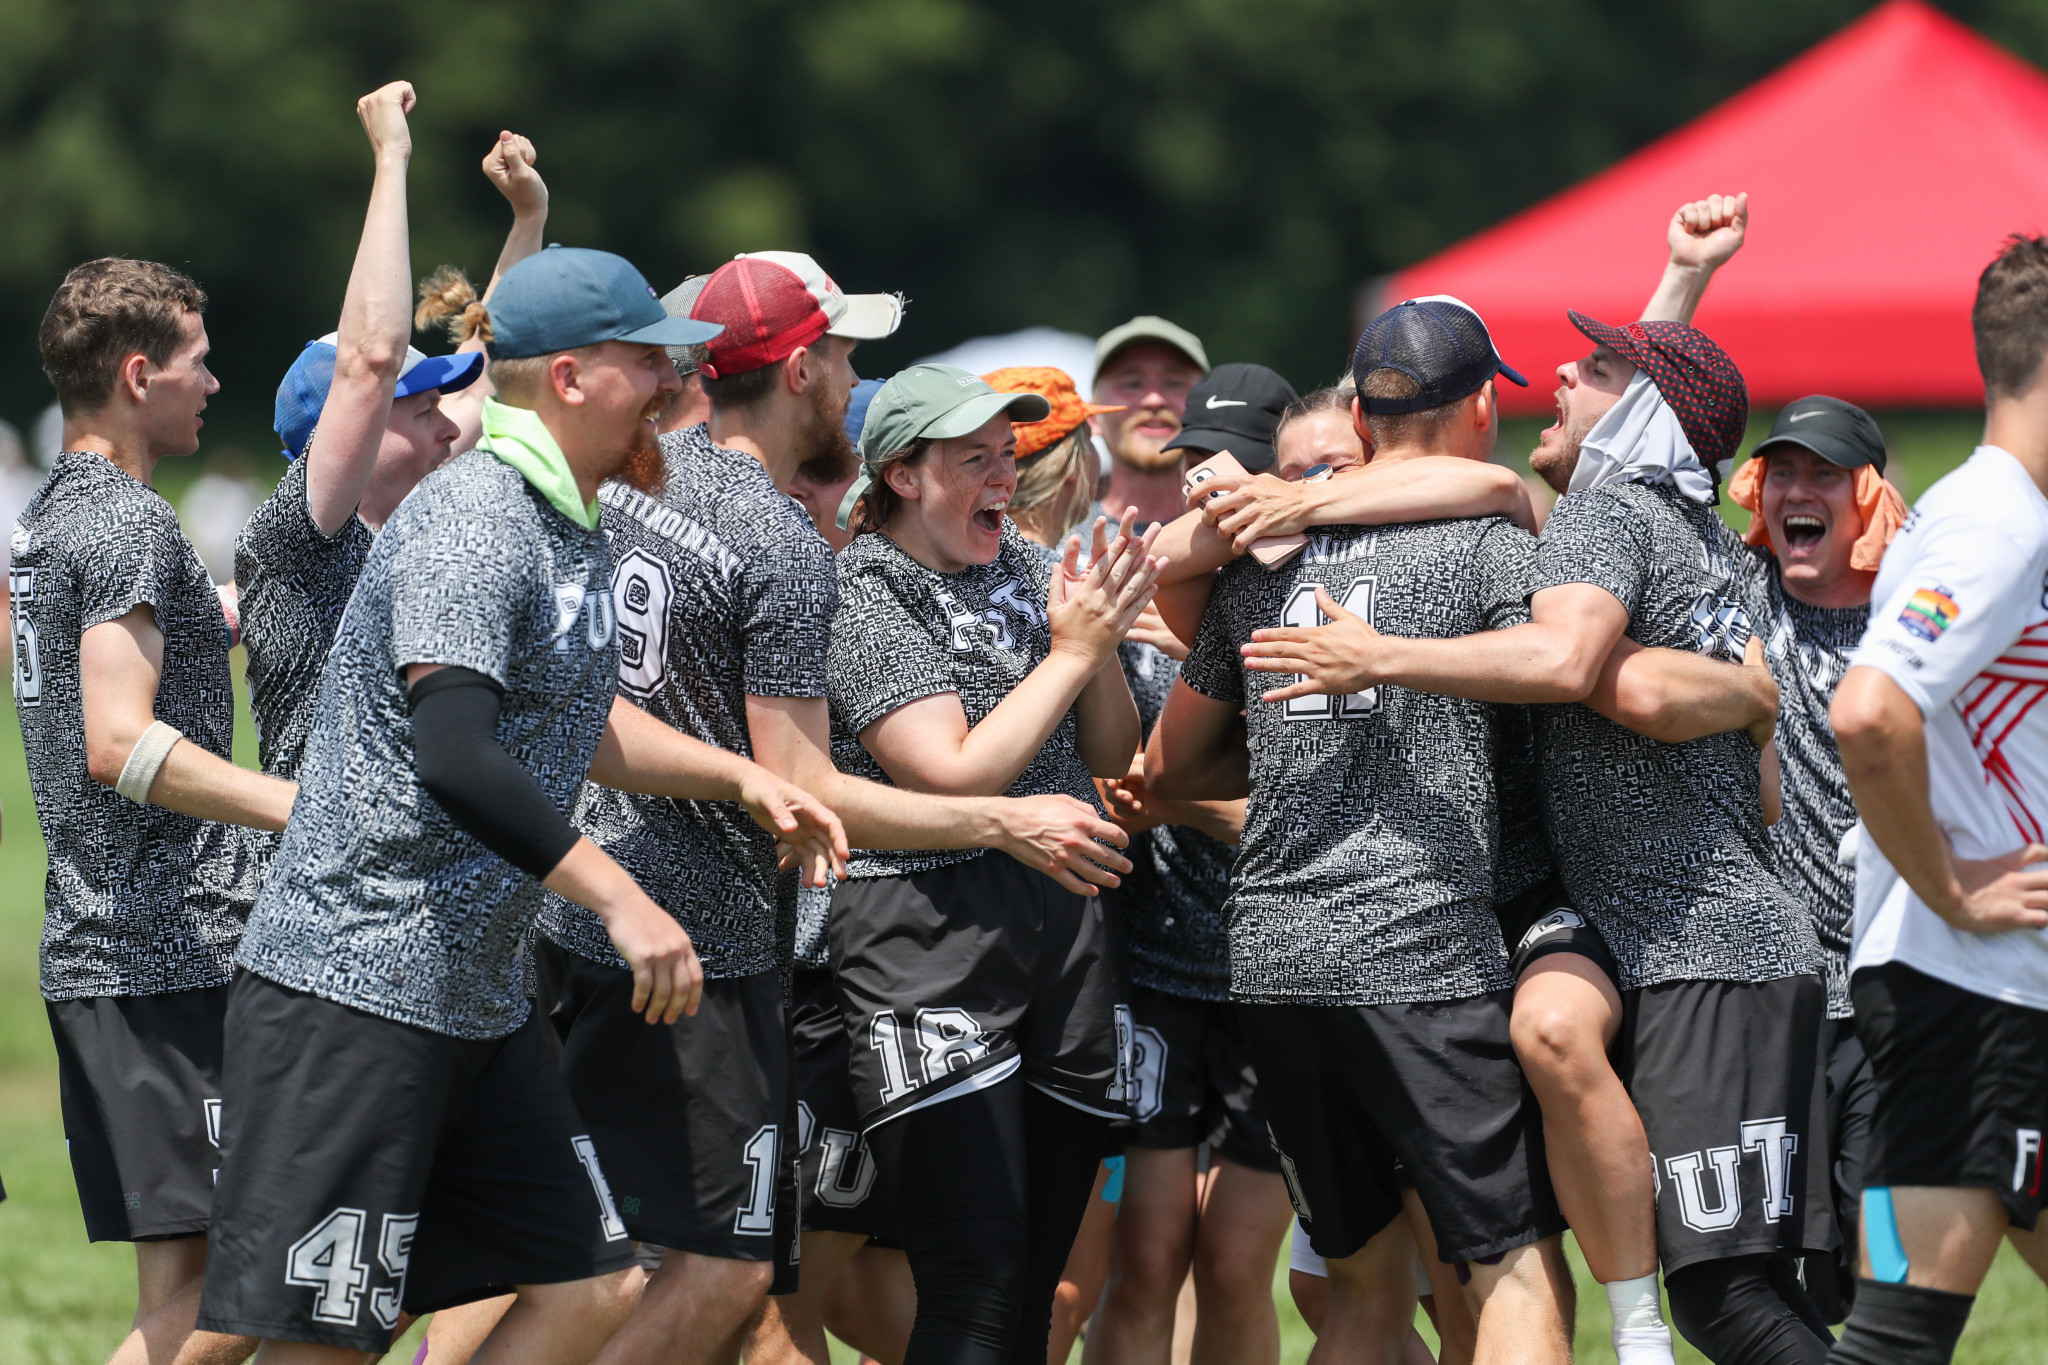 Pussin Tiristäjät defeated Britain Ultimate in the mixed division quarter-finals ©Paul Rutherford for UltiPhotos